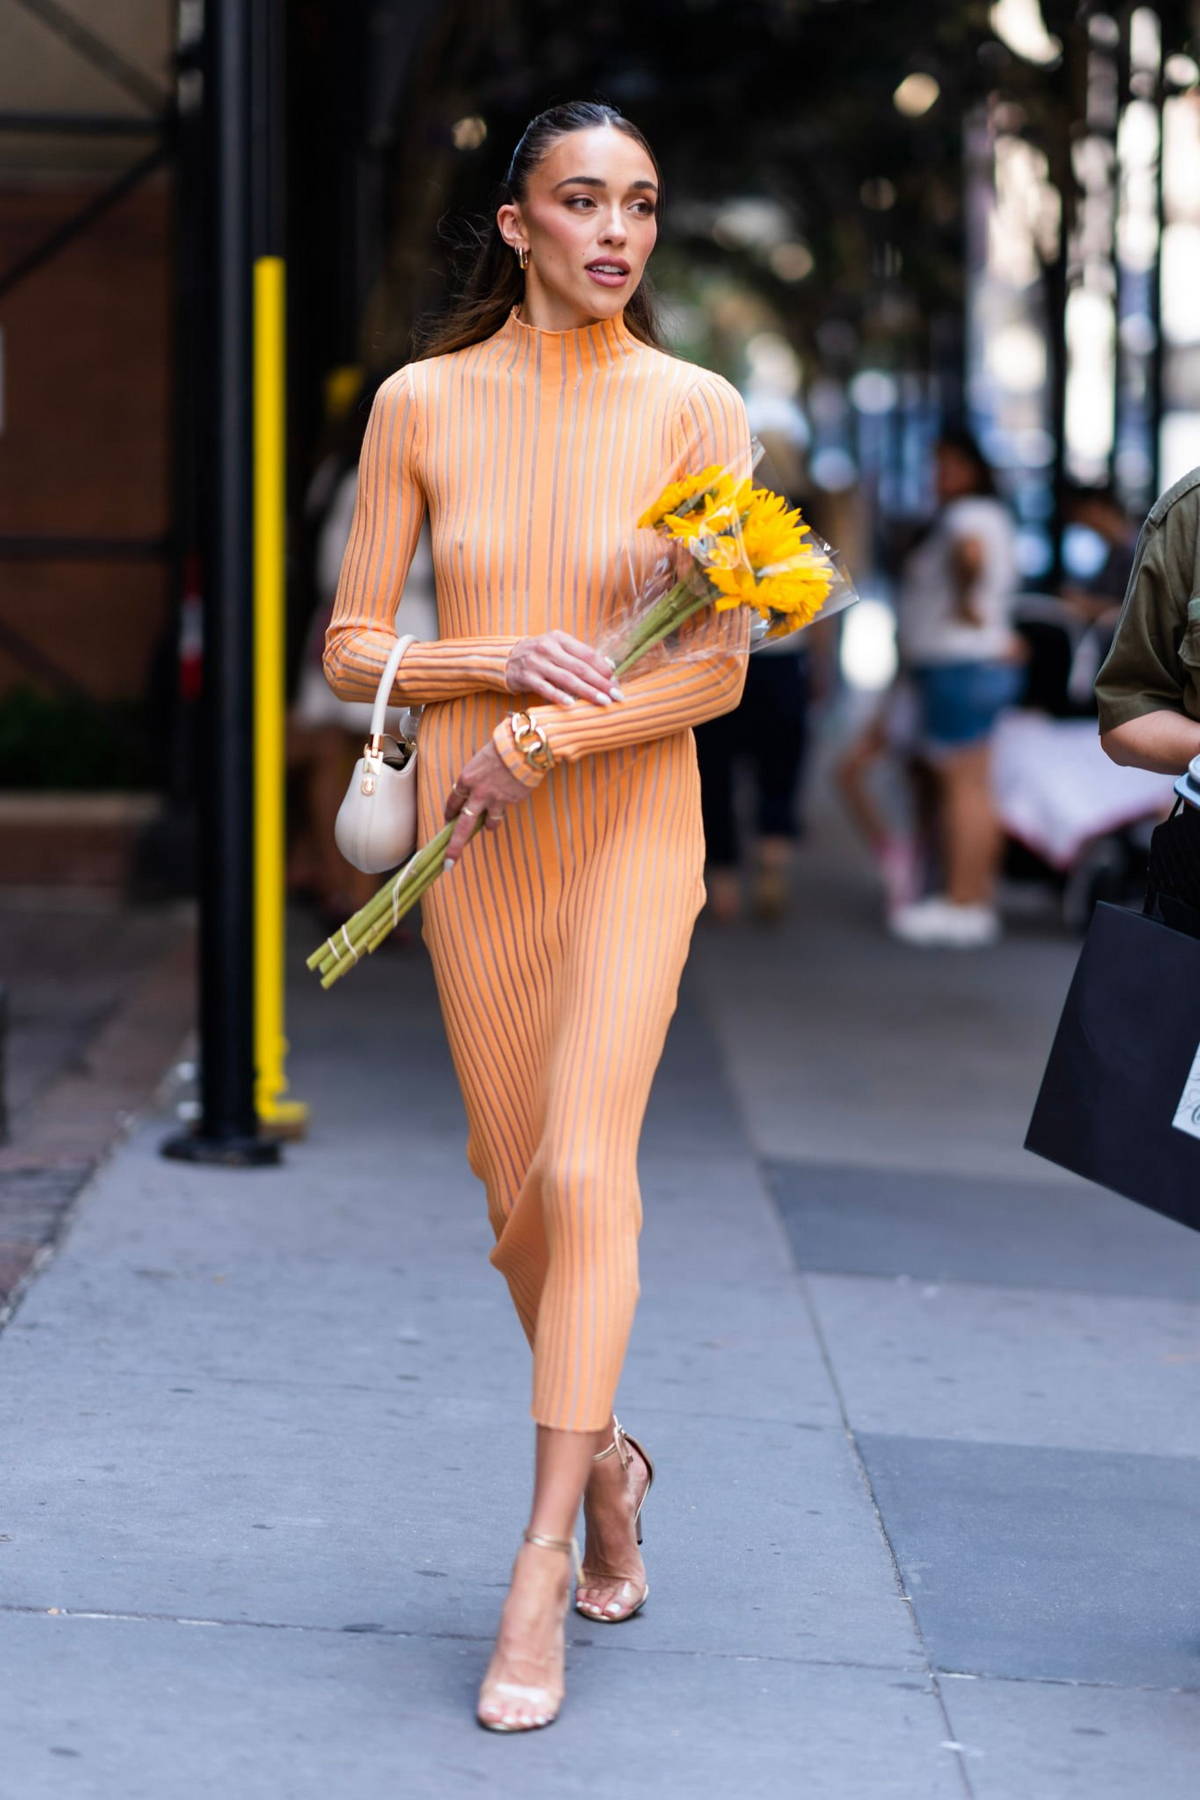 Sophia Culpo looks striking in a semi-sheer orange dress while stepping out  in New York